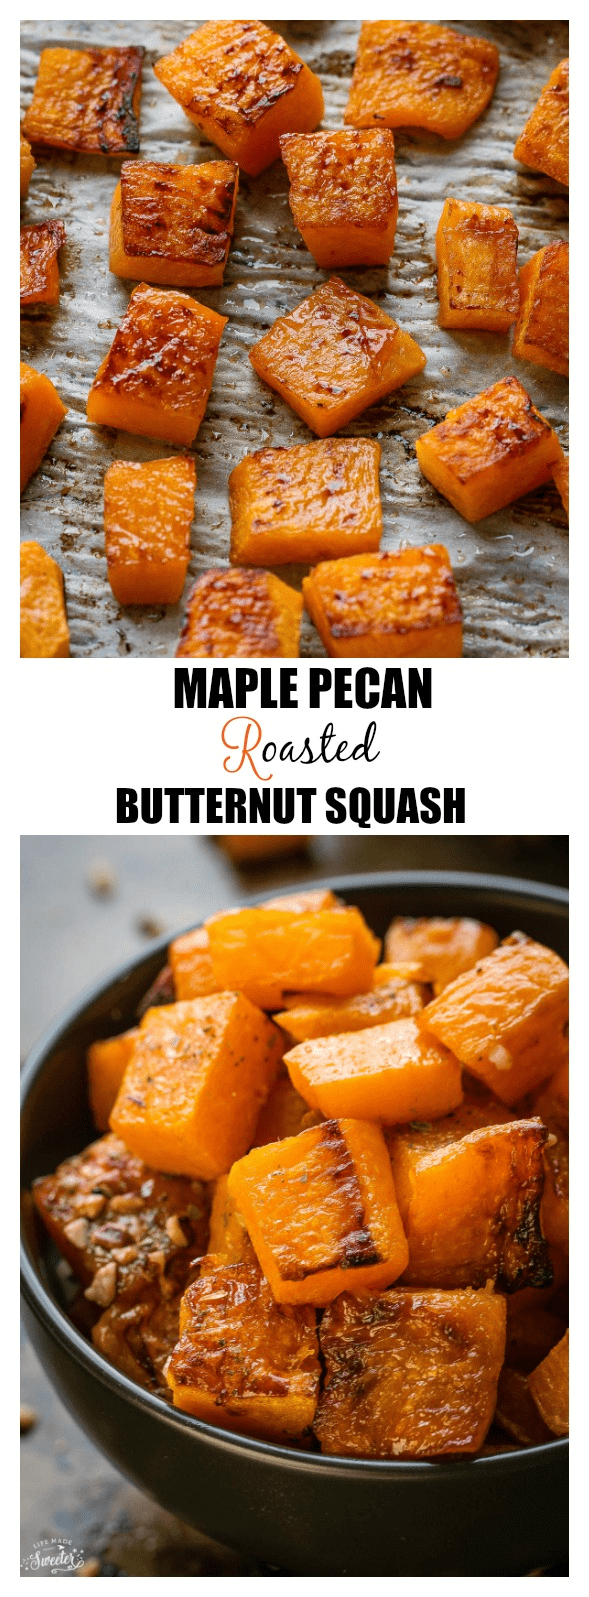  Maple Pecan Roasted Butternut Squash makes the perfect side dish